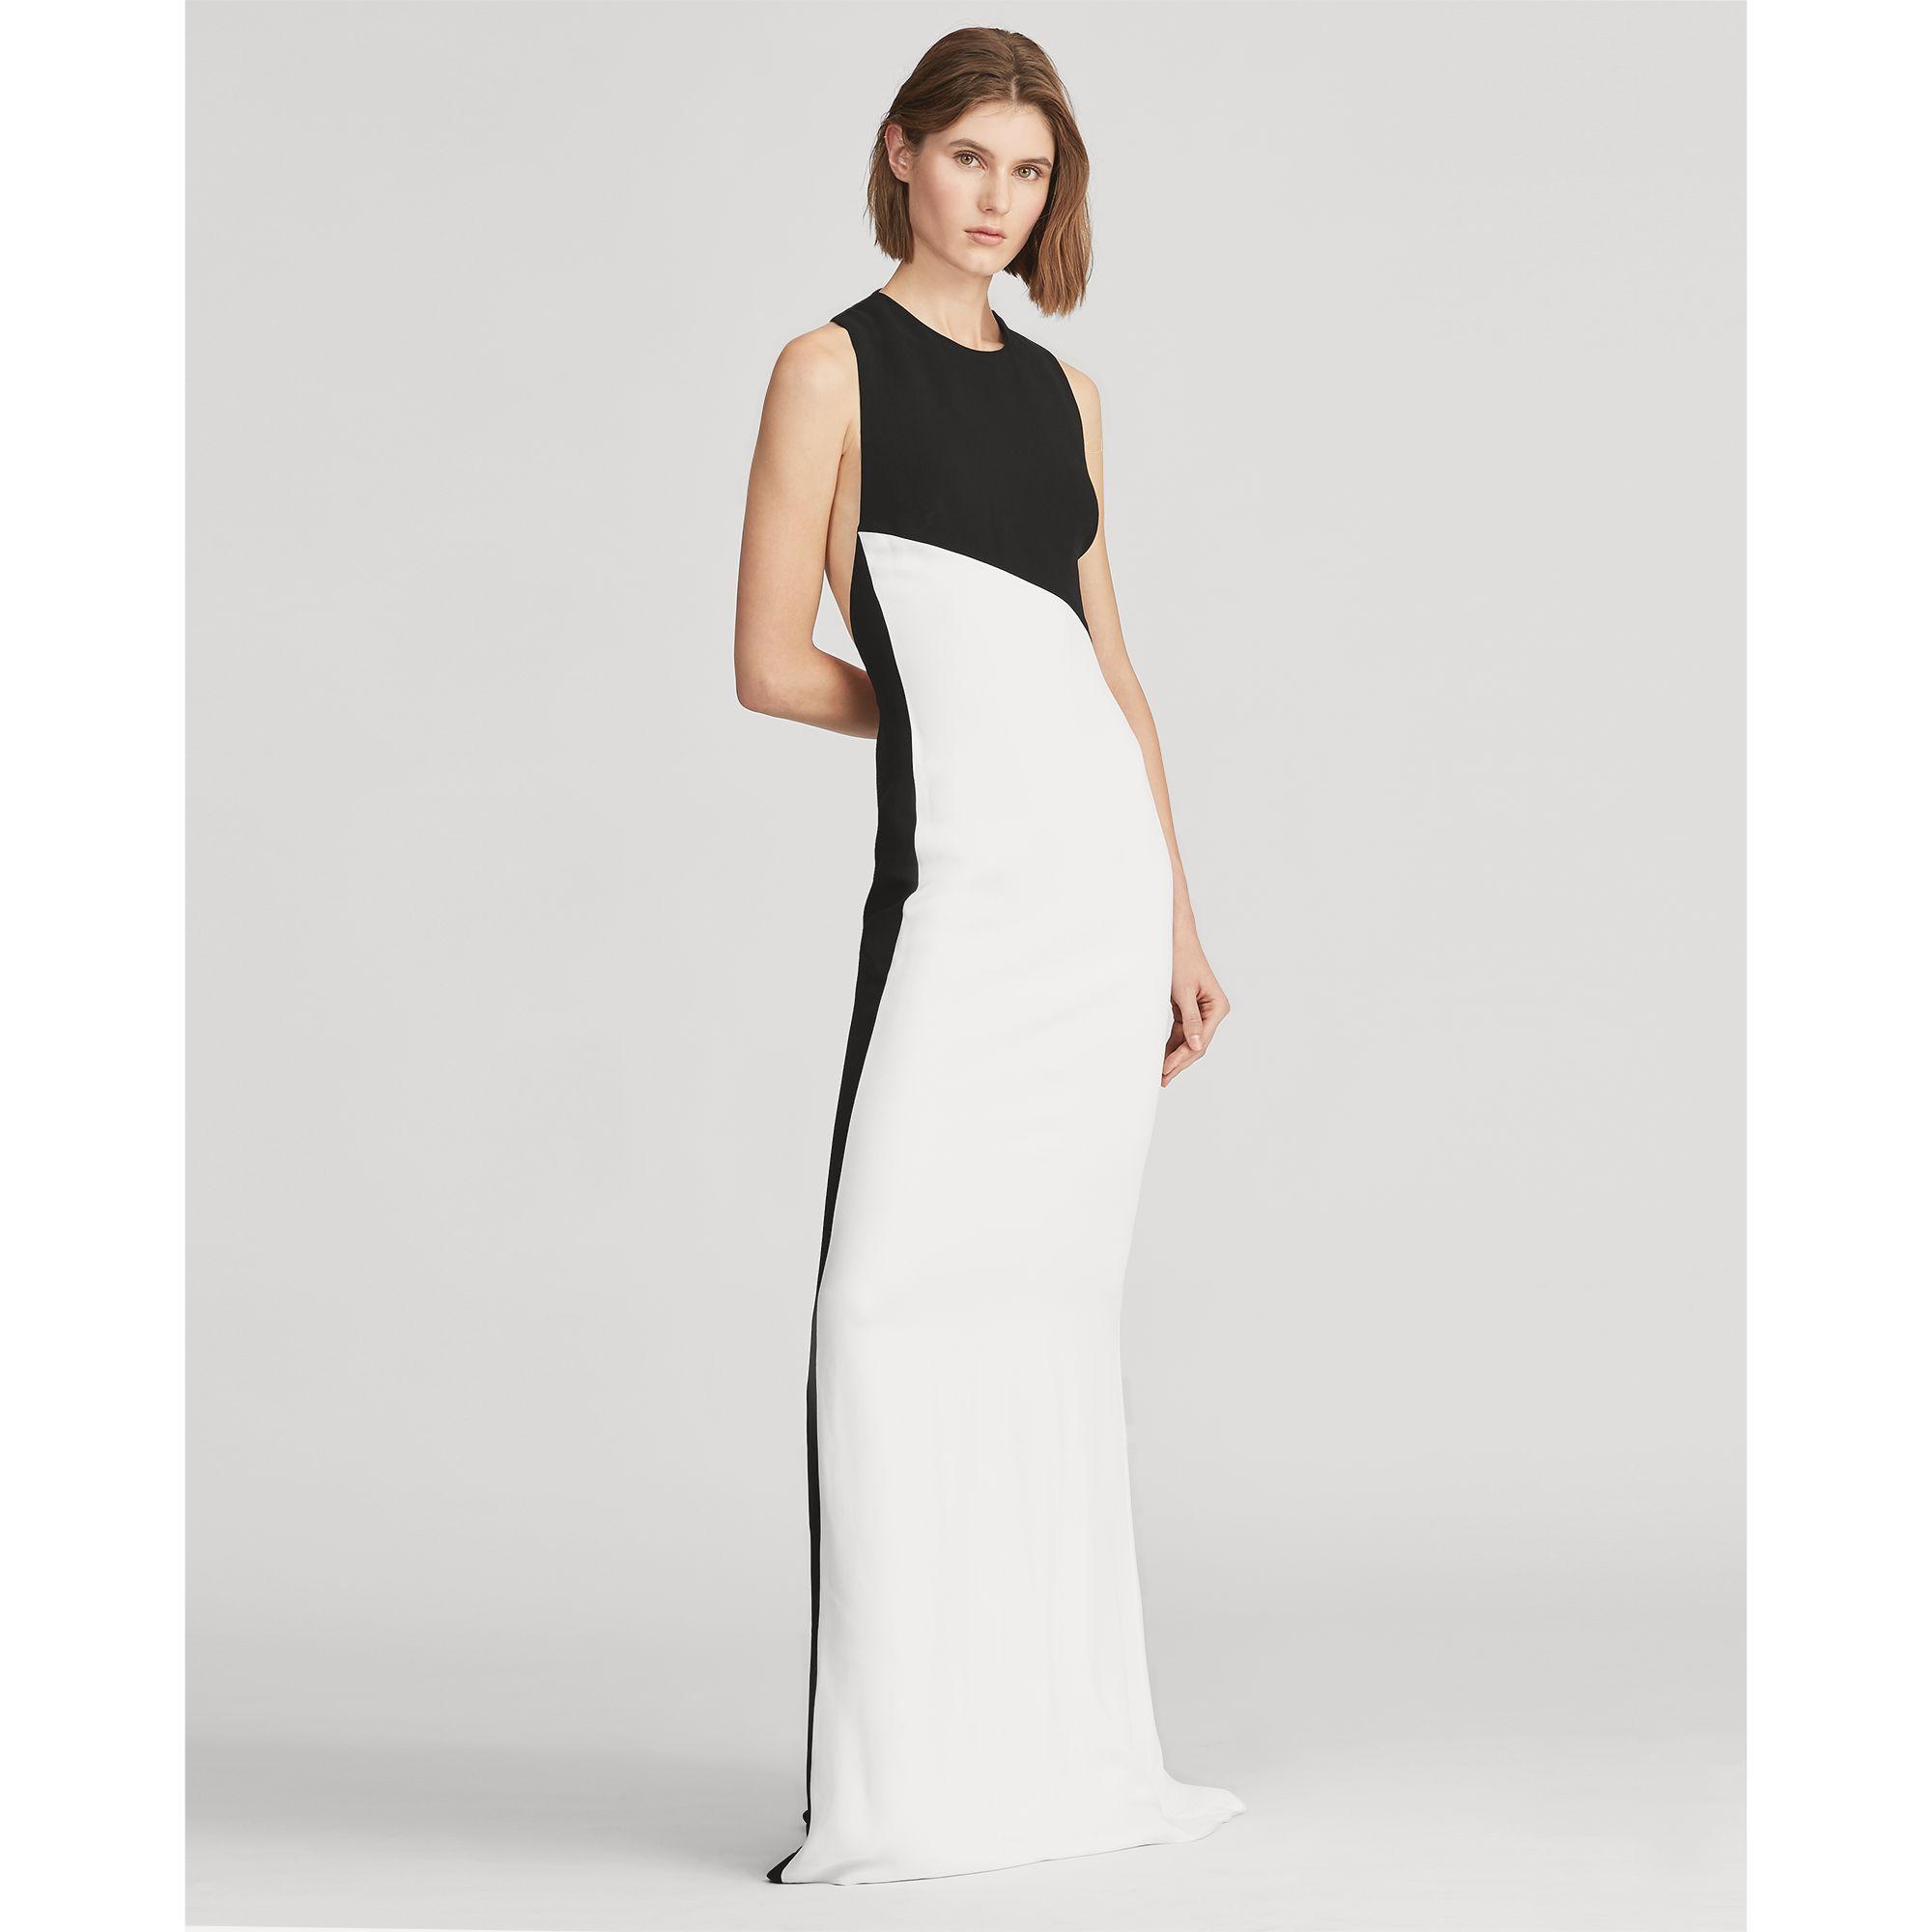 ralph lauren black and white gown